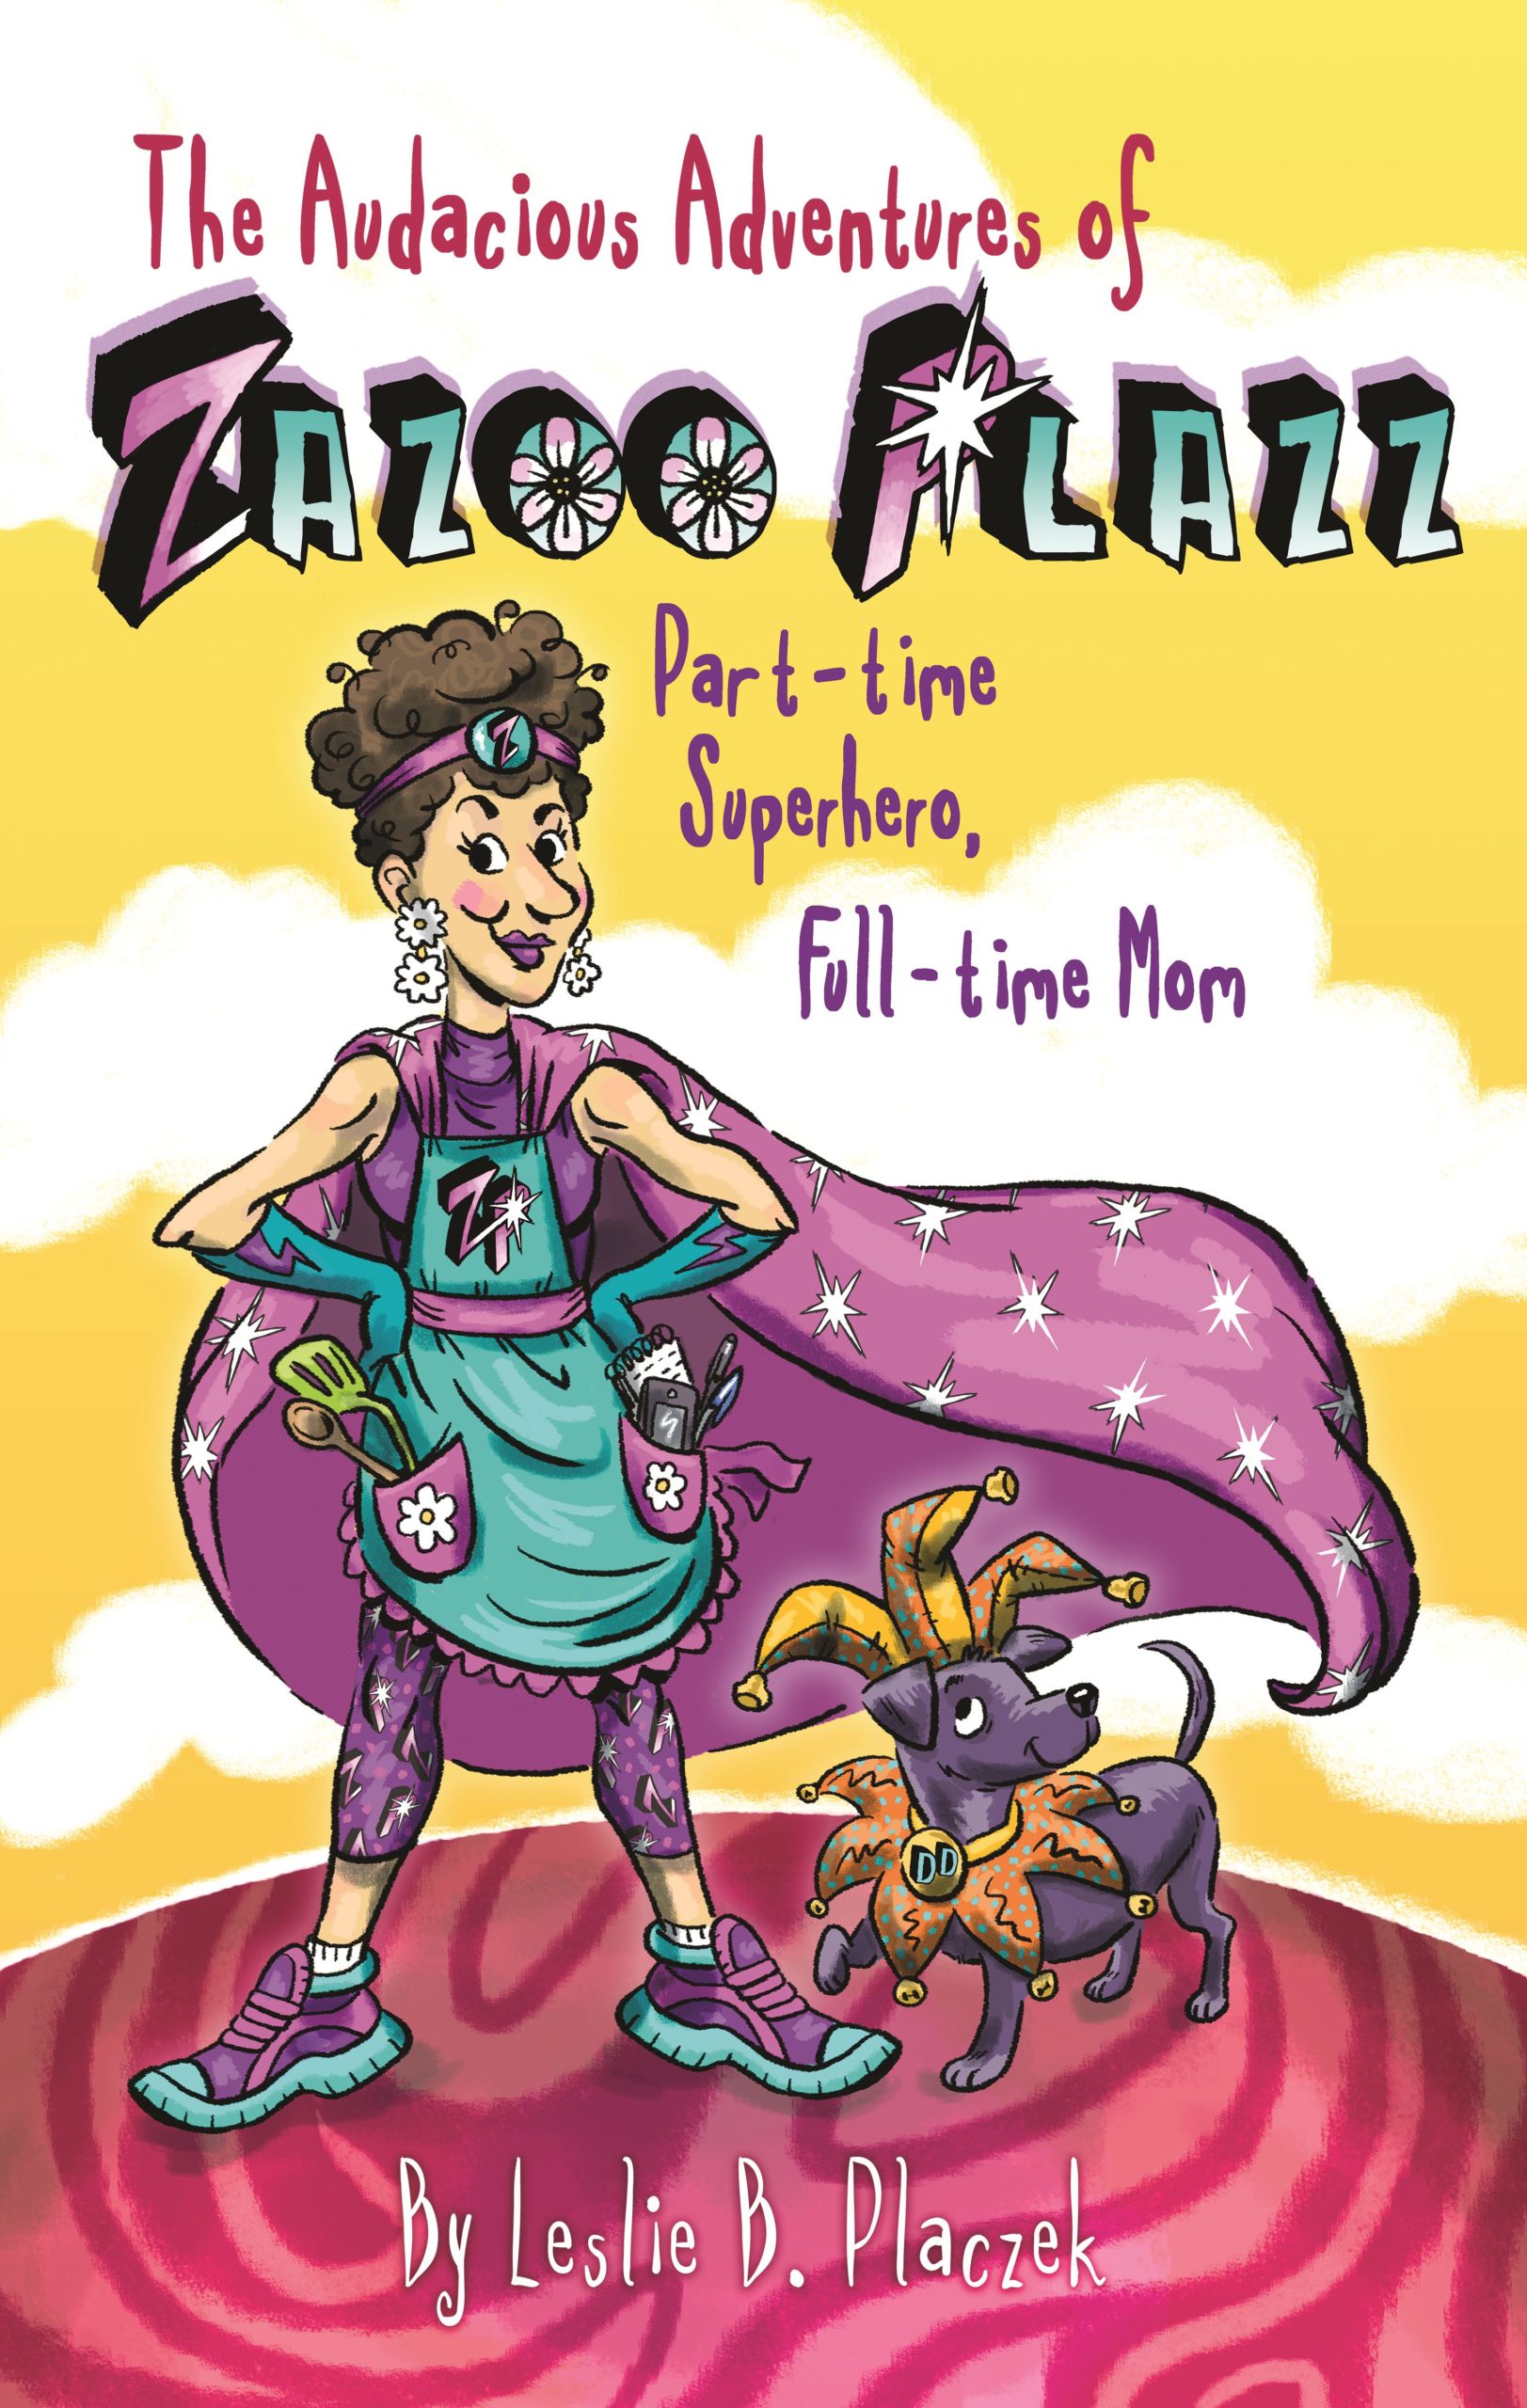 The Audacious Adventures of Zazoo Plazz, Part-time Superhero, Full-time Mom
Published by Leslie B. Placzek